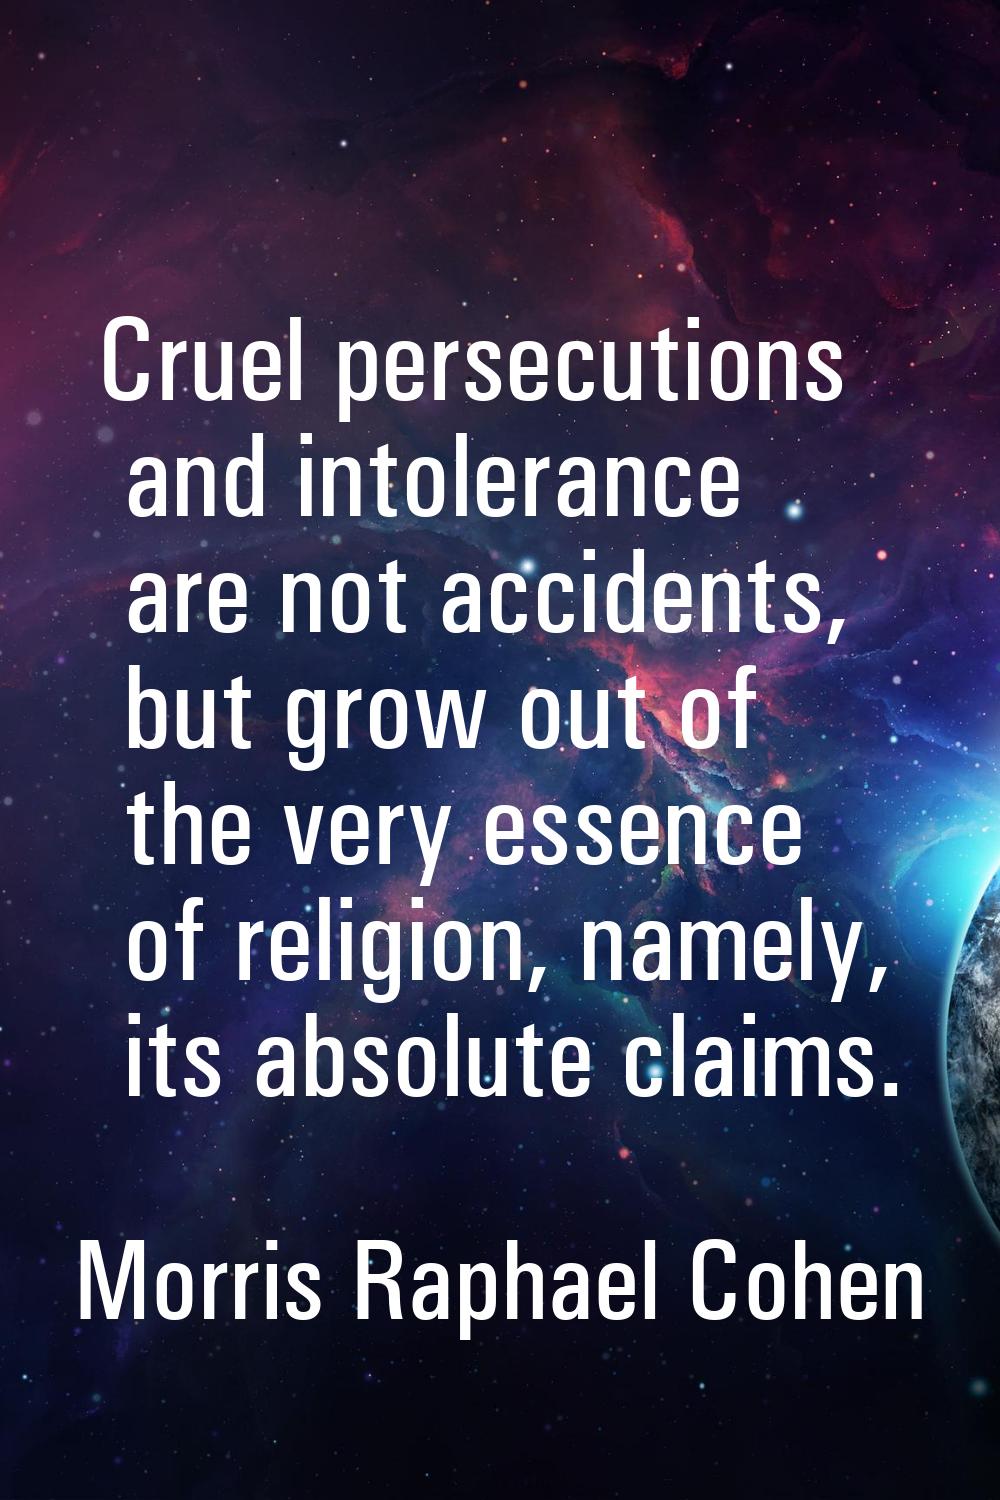 Cruel persecutions and intolerance are not accidents, but grow out of the very essence of religion,